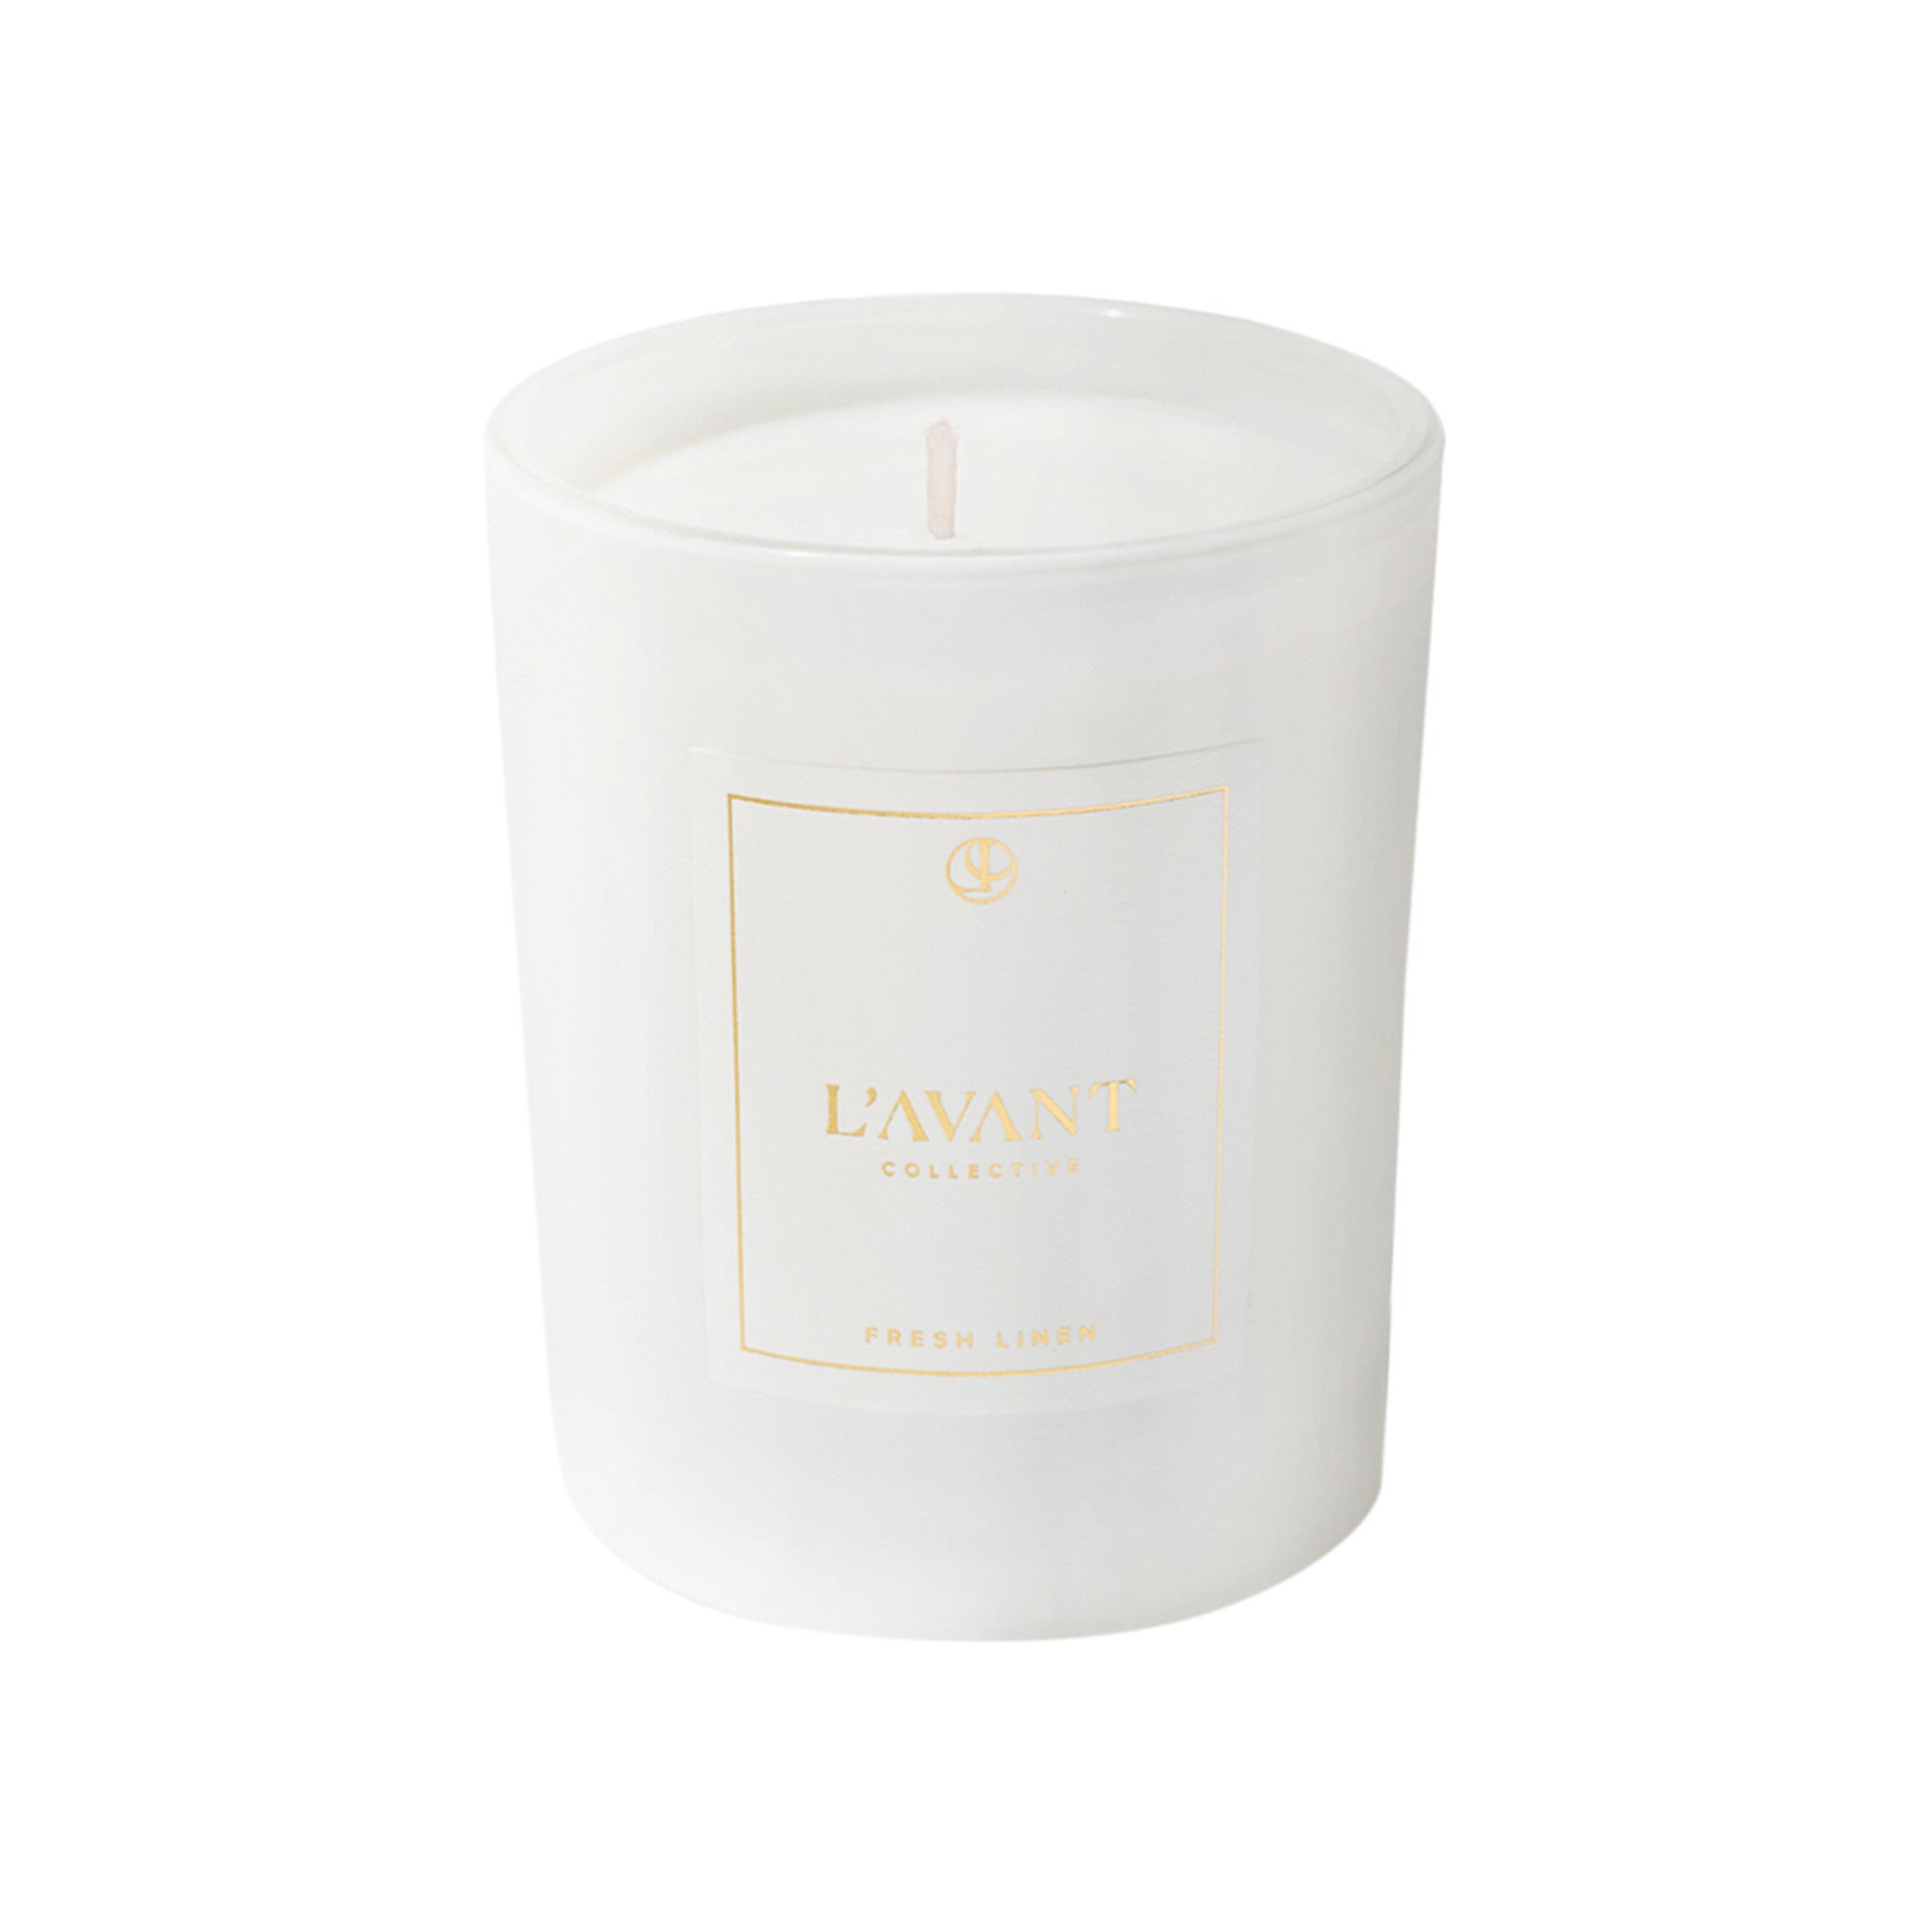 L’Avant Collective Fresh Linen Candle Color/Shade variant: White main image.